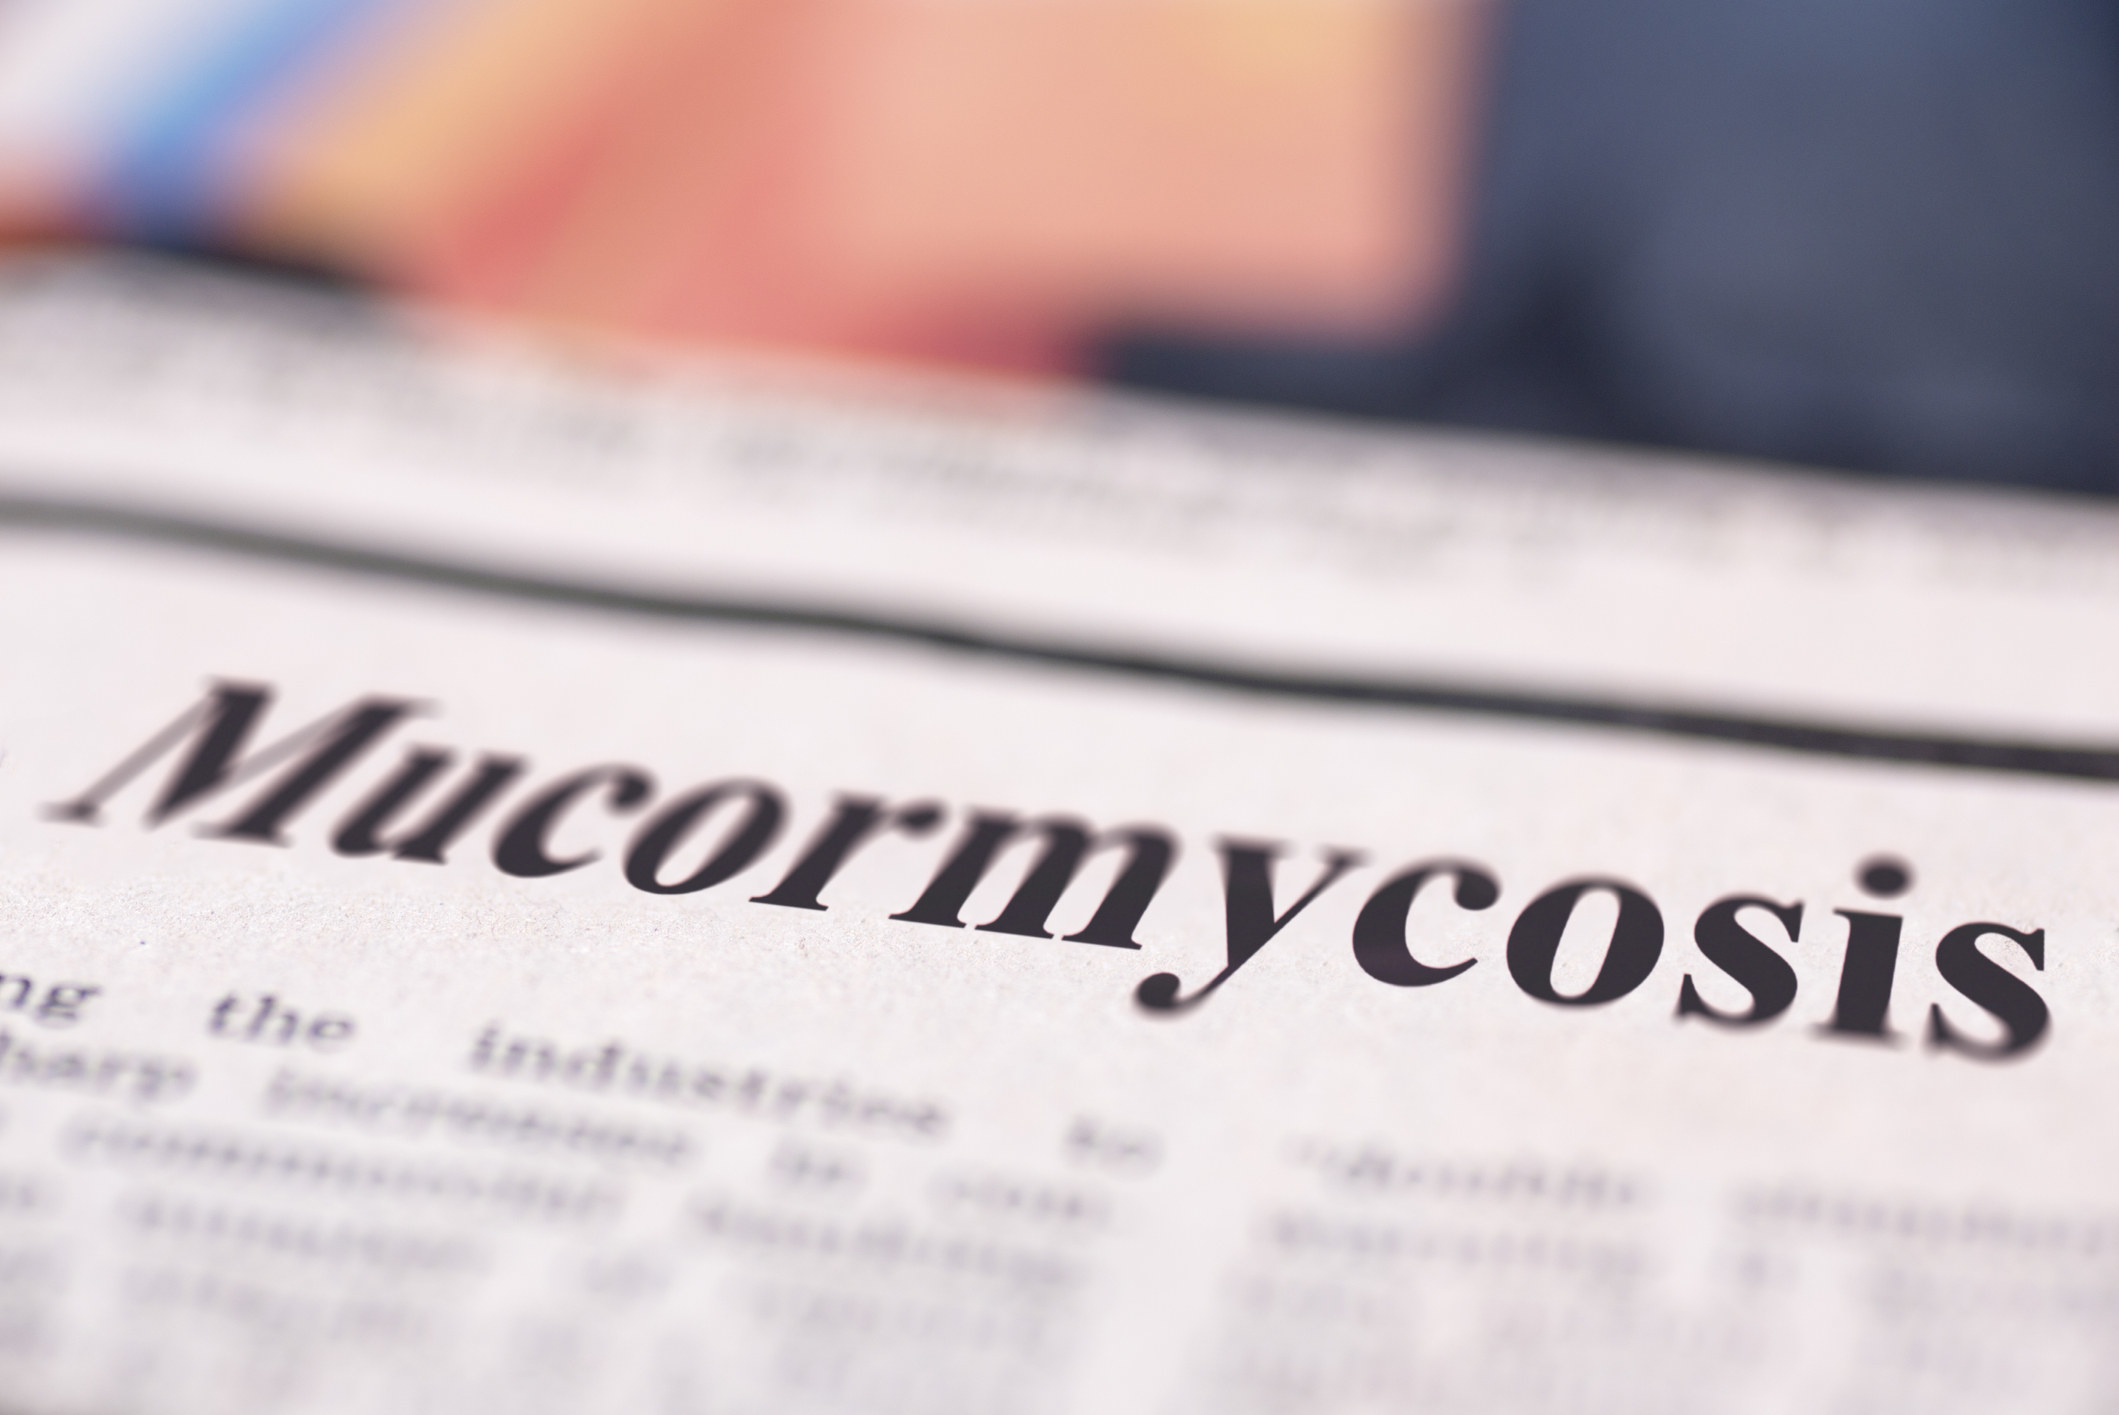 Mucormycosis written newspaper close up shot to the text